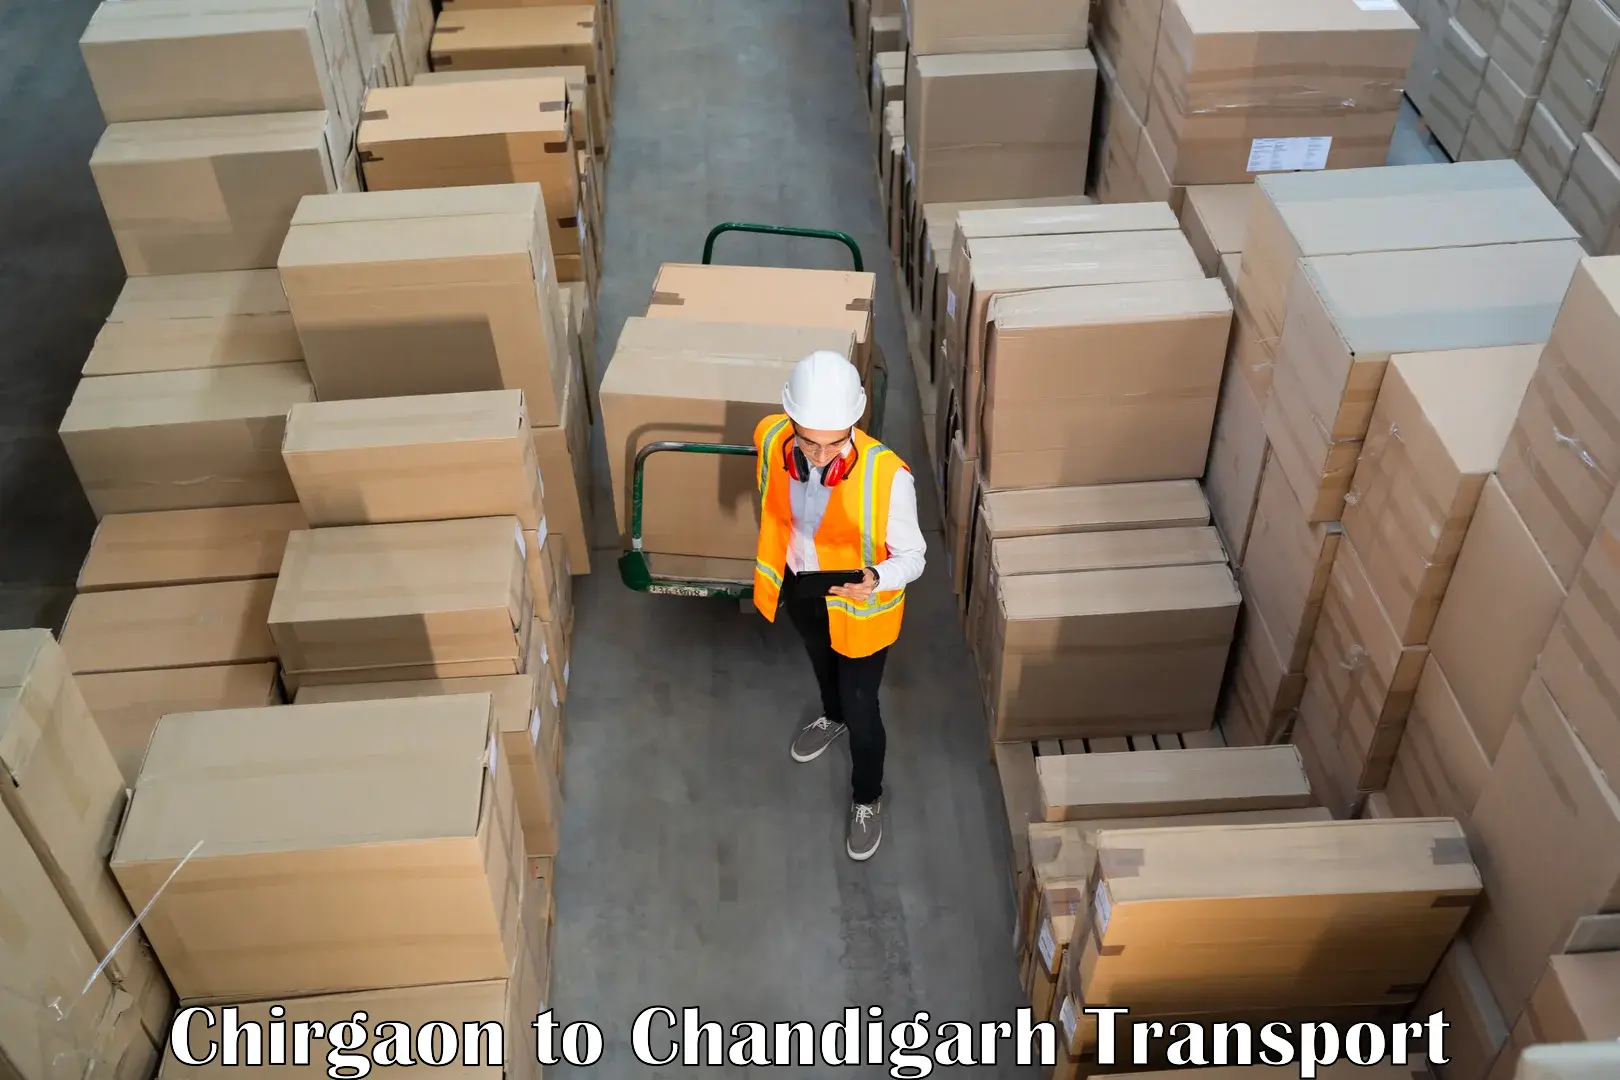 Air freight transport services Chirgaon to Chandigarh